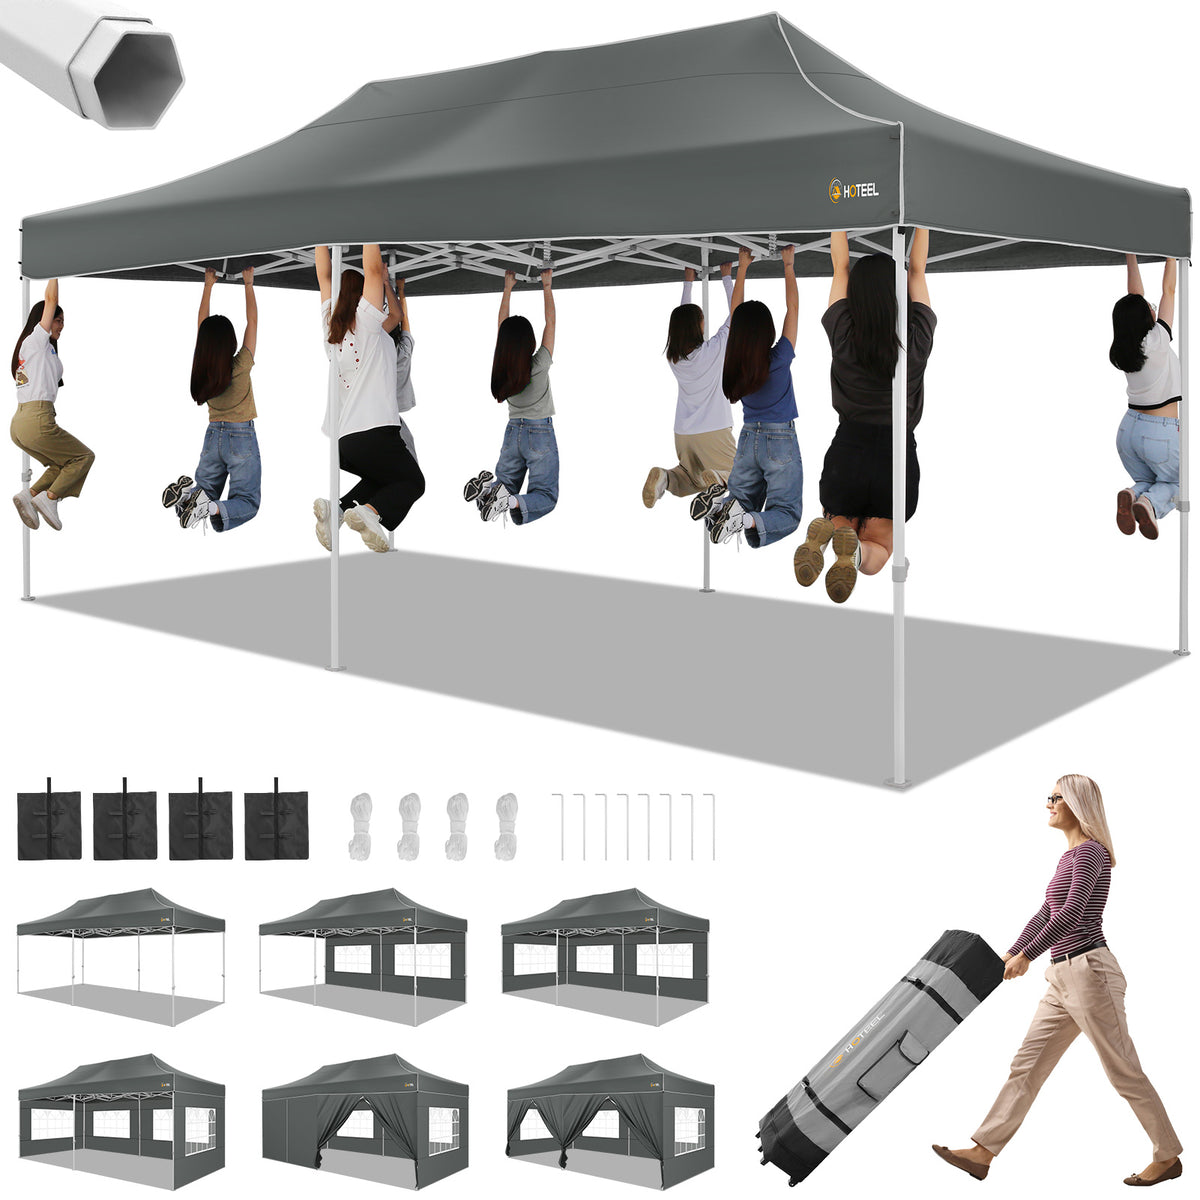 COBIZI Canopy Tent 10x20 Pop Up Heavy Duty Canopy Tent with 6 Removable Sidewalls,Party Tent for Weddings,Beaches,Outdoor Events,Commercial Seasonal Wind UV 50+& Waterproof&Sunburn Protection,Gray